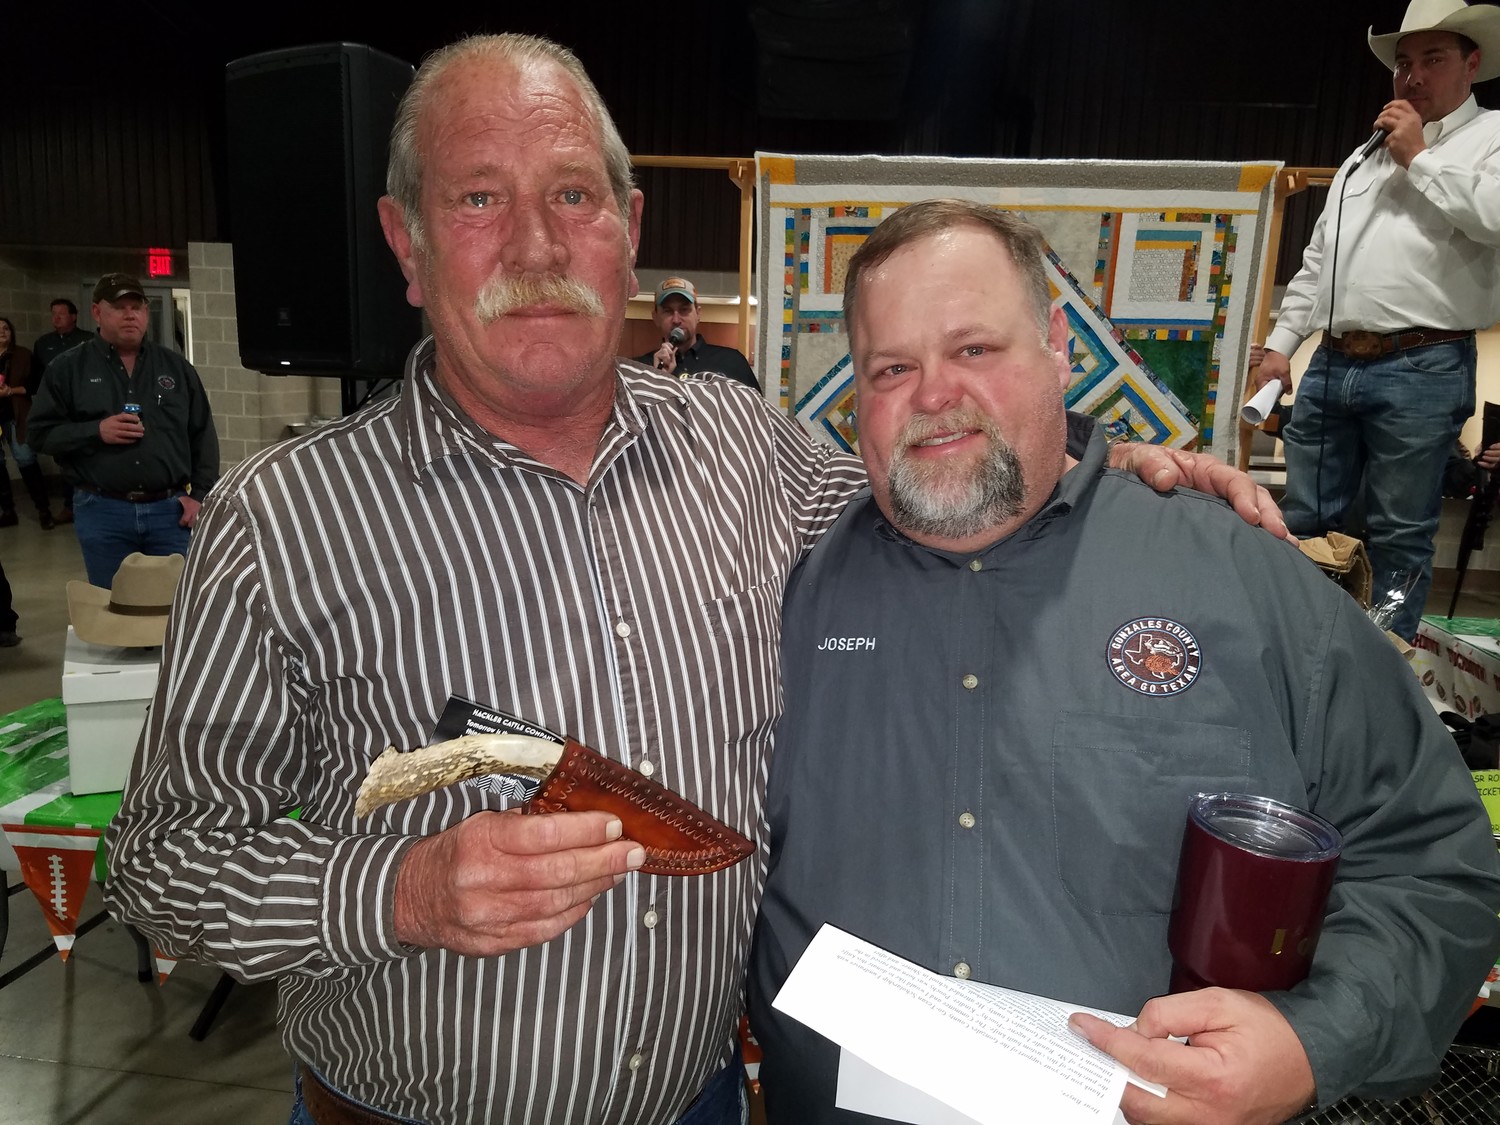 Gordon Brandenburg holds a knife he outbid everyone for during the live auction. The knife was named for Randale Eugene “Big Poochy” Kridler and made by Cary Hackler of Grimes County. After winning the bid for the knife, Brandenburg gave it to Kridler’s son, Joseph “Poochy” Kridler.